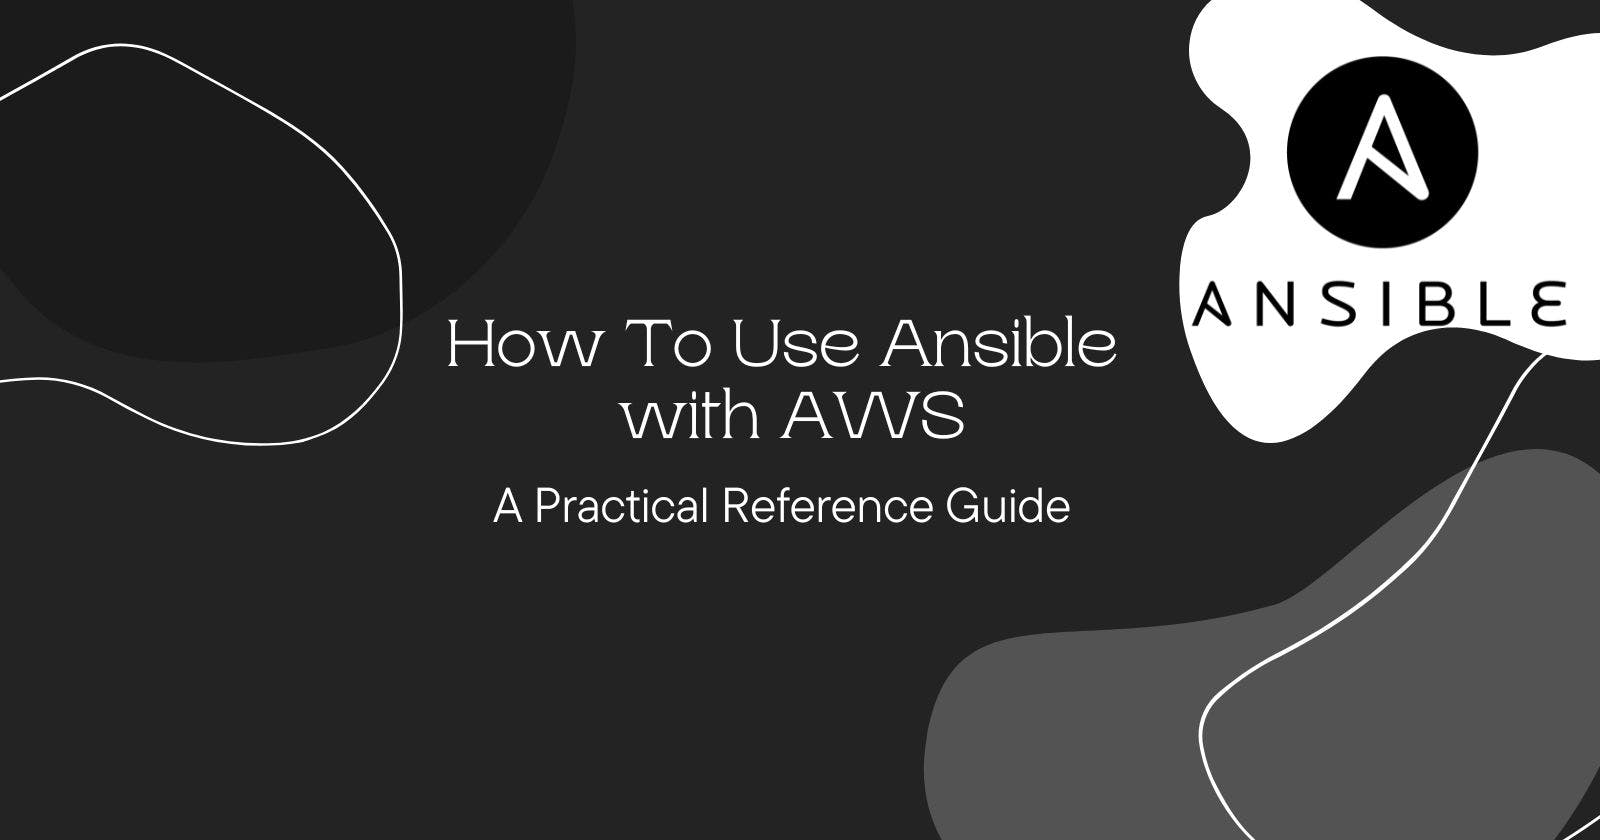 How To Use Ansible with AWS: A Practical Reference Guide